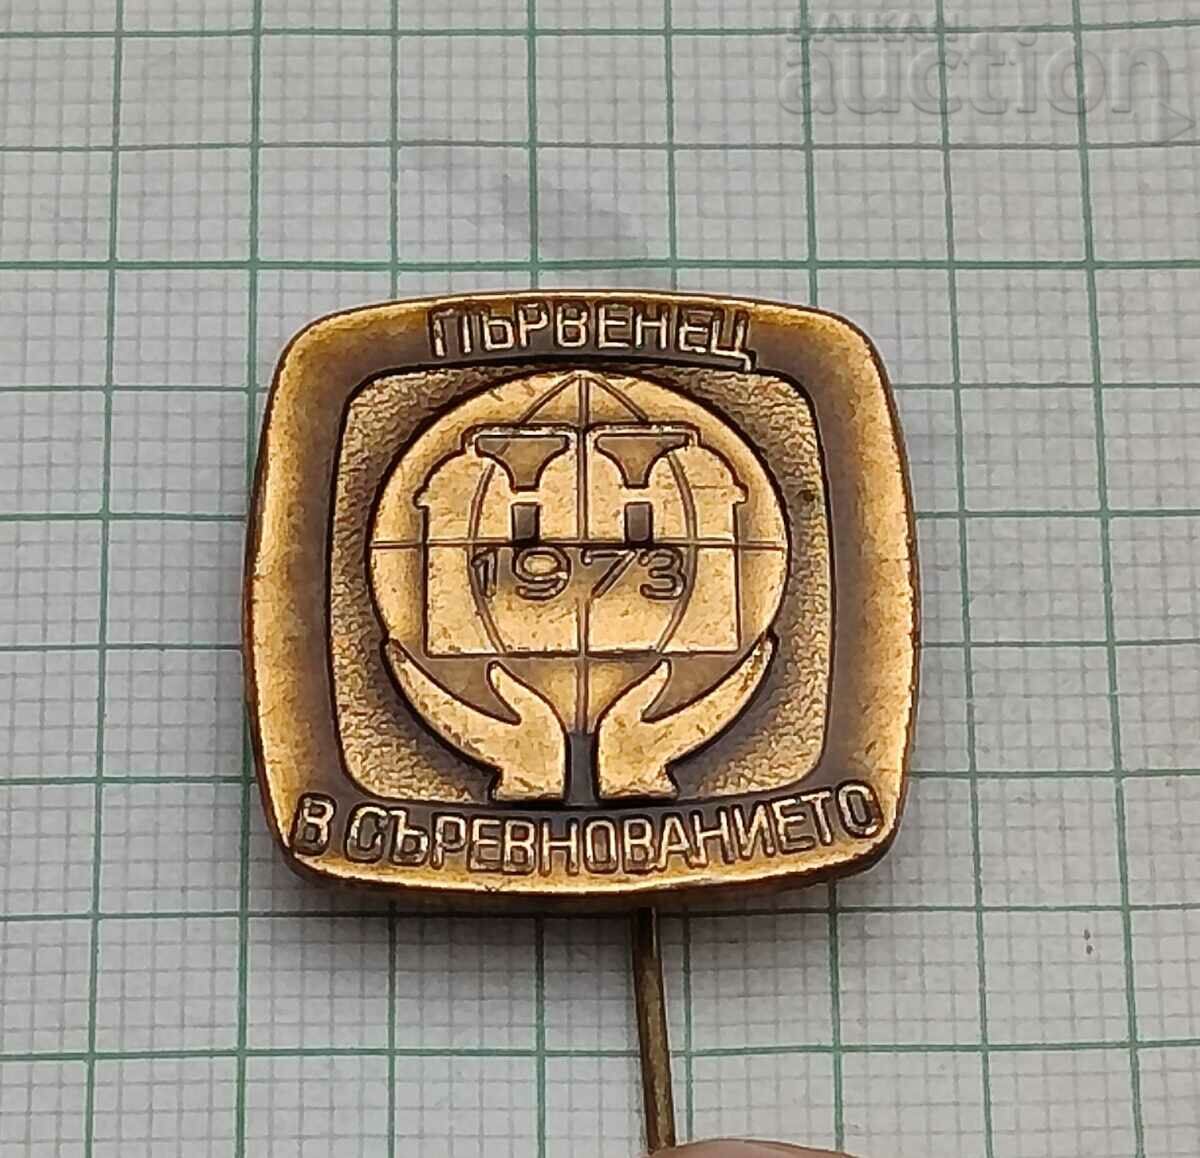 1973 COMPETITION FIRST BADGE